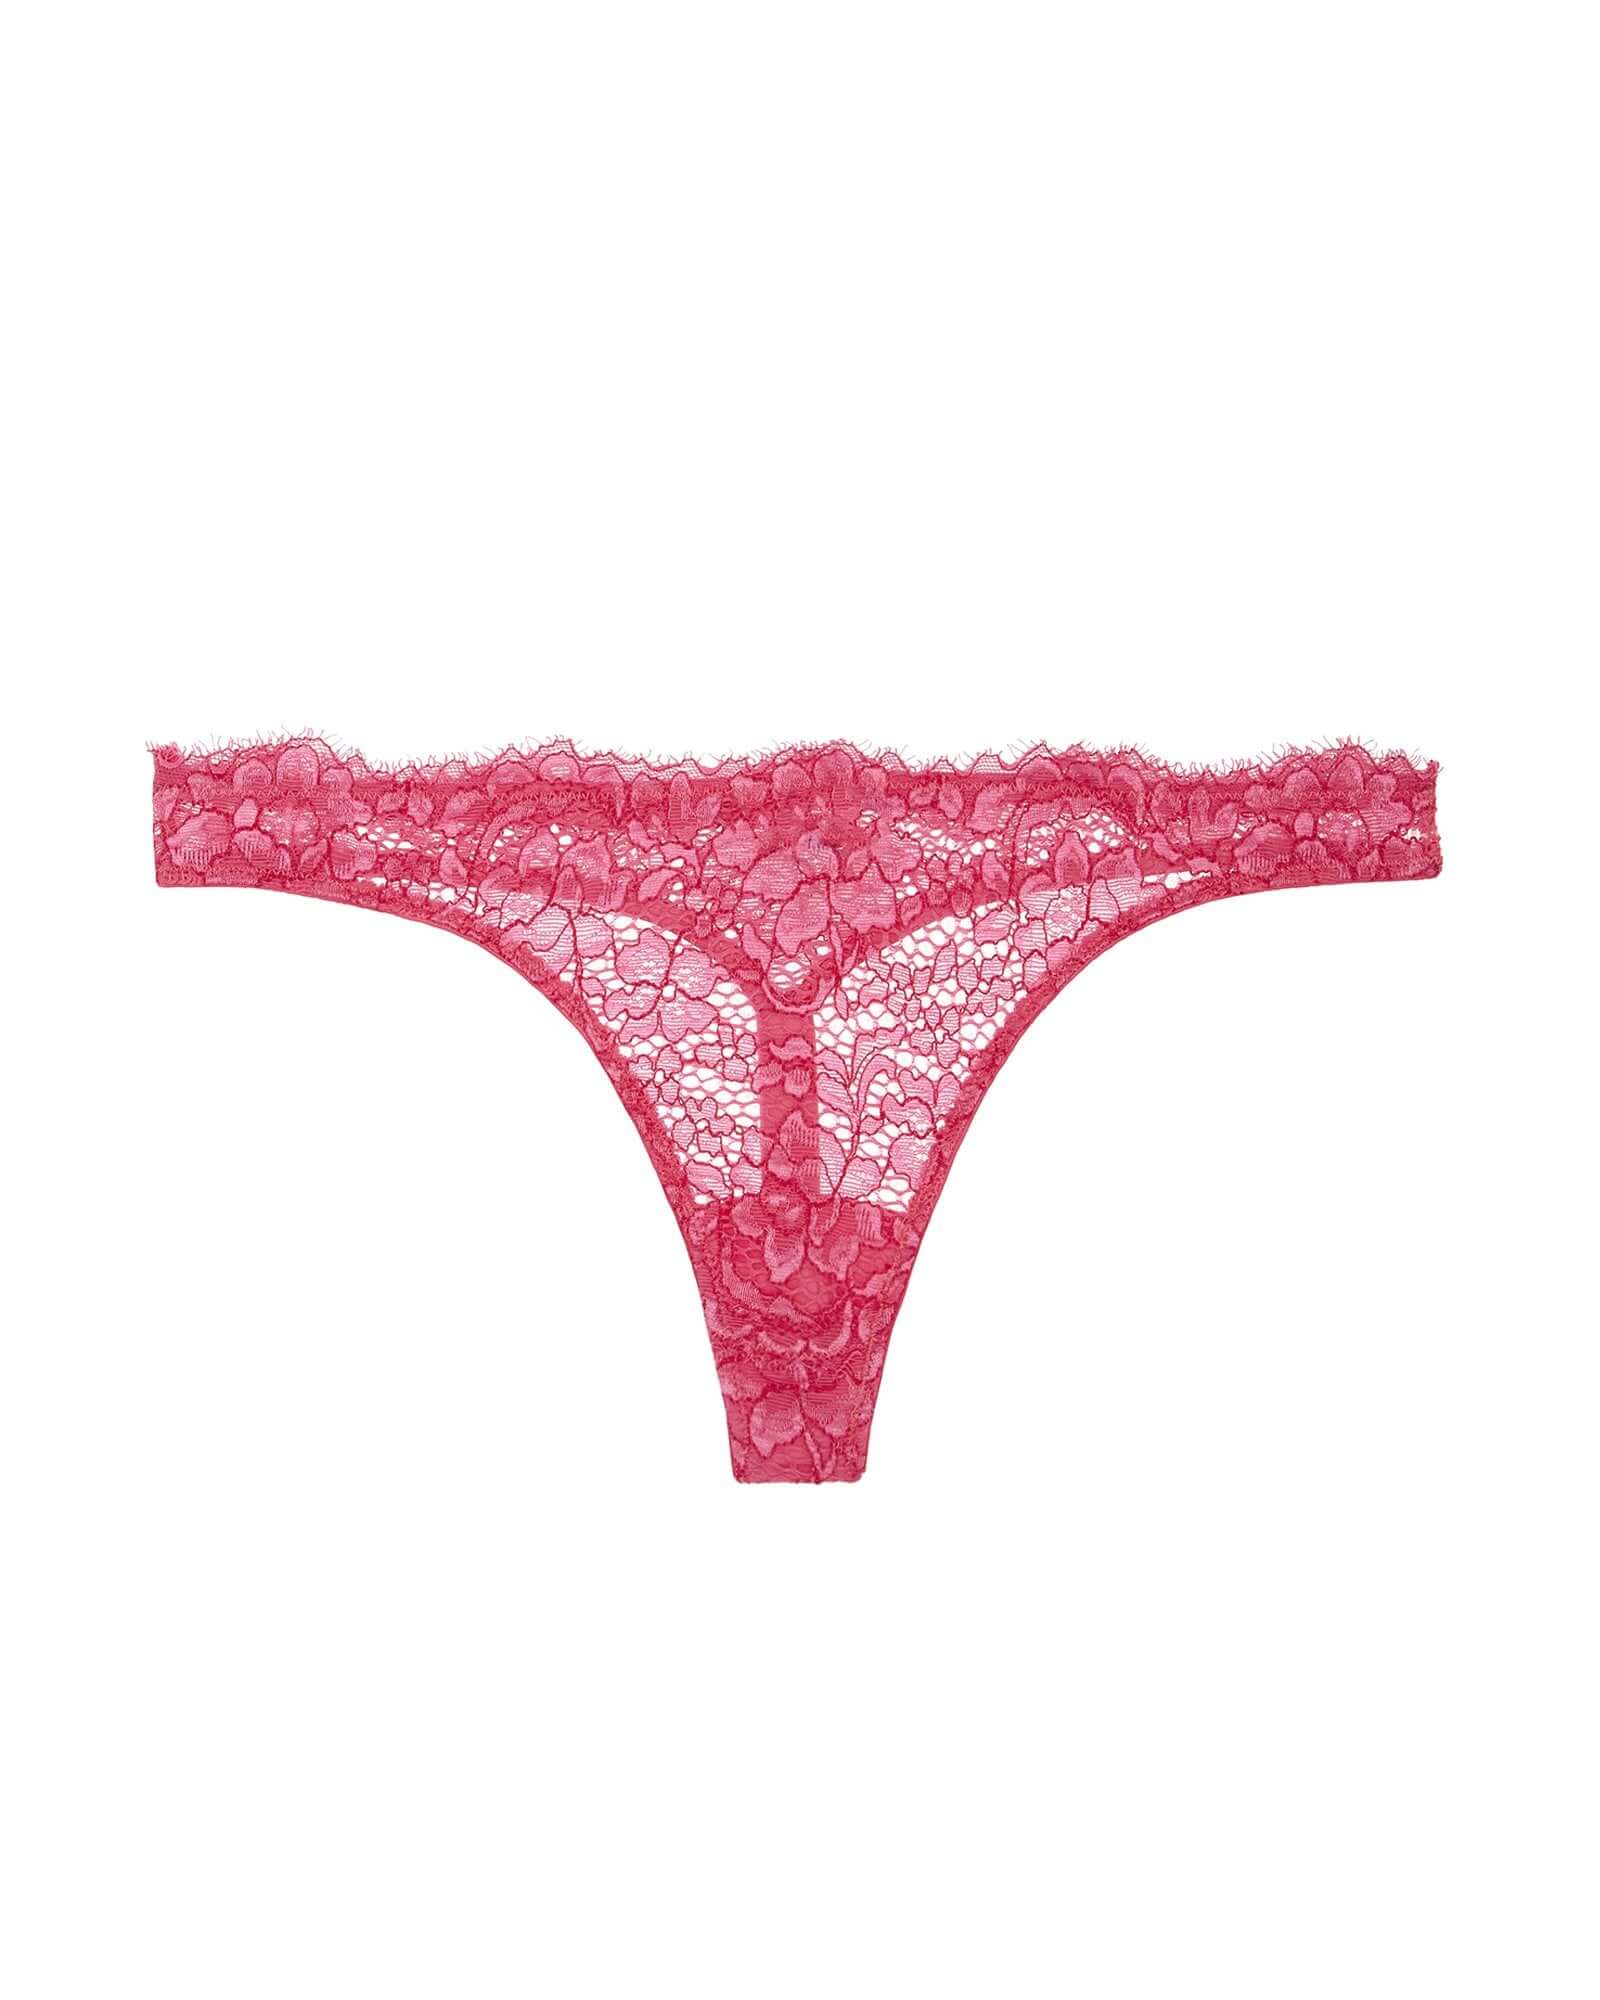 Cosabella Pret A Porter Low Rise Thong Color: Miami Pink Size: S/M at Petticoat Lane  Greenwich, CT